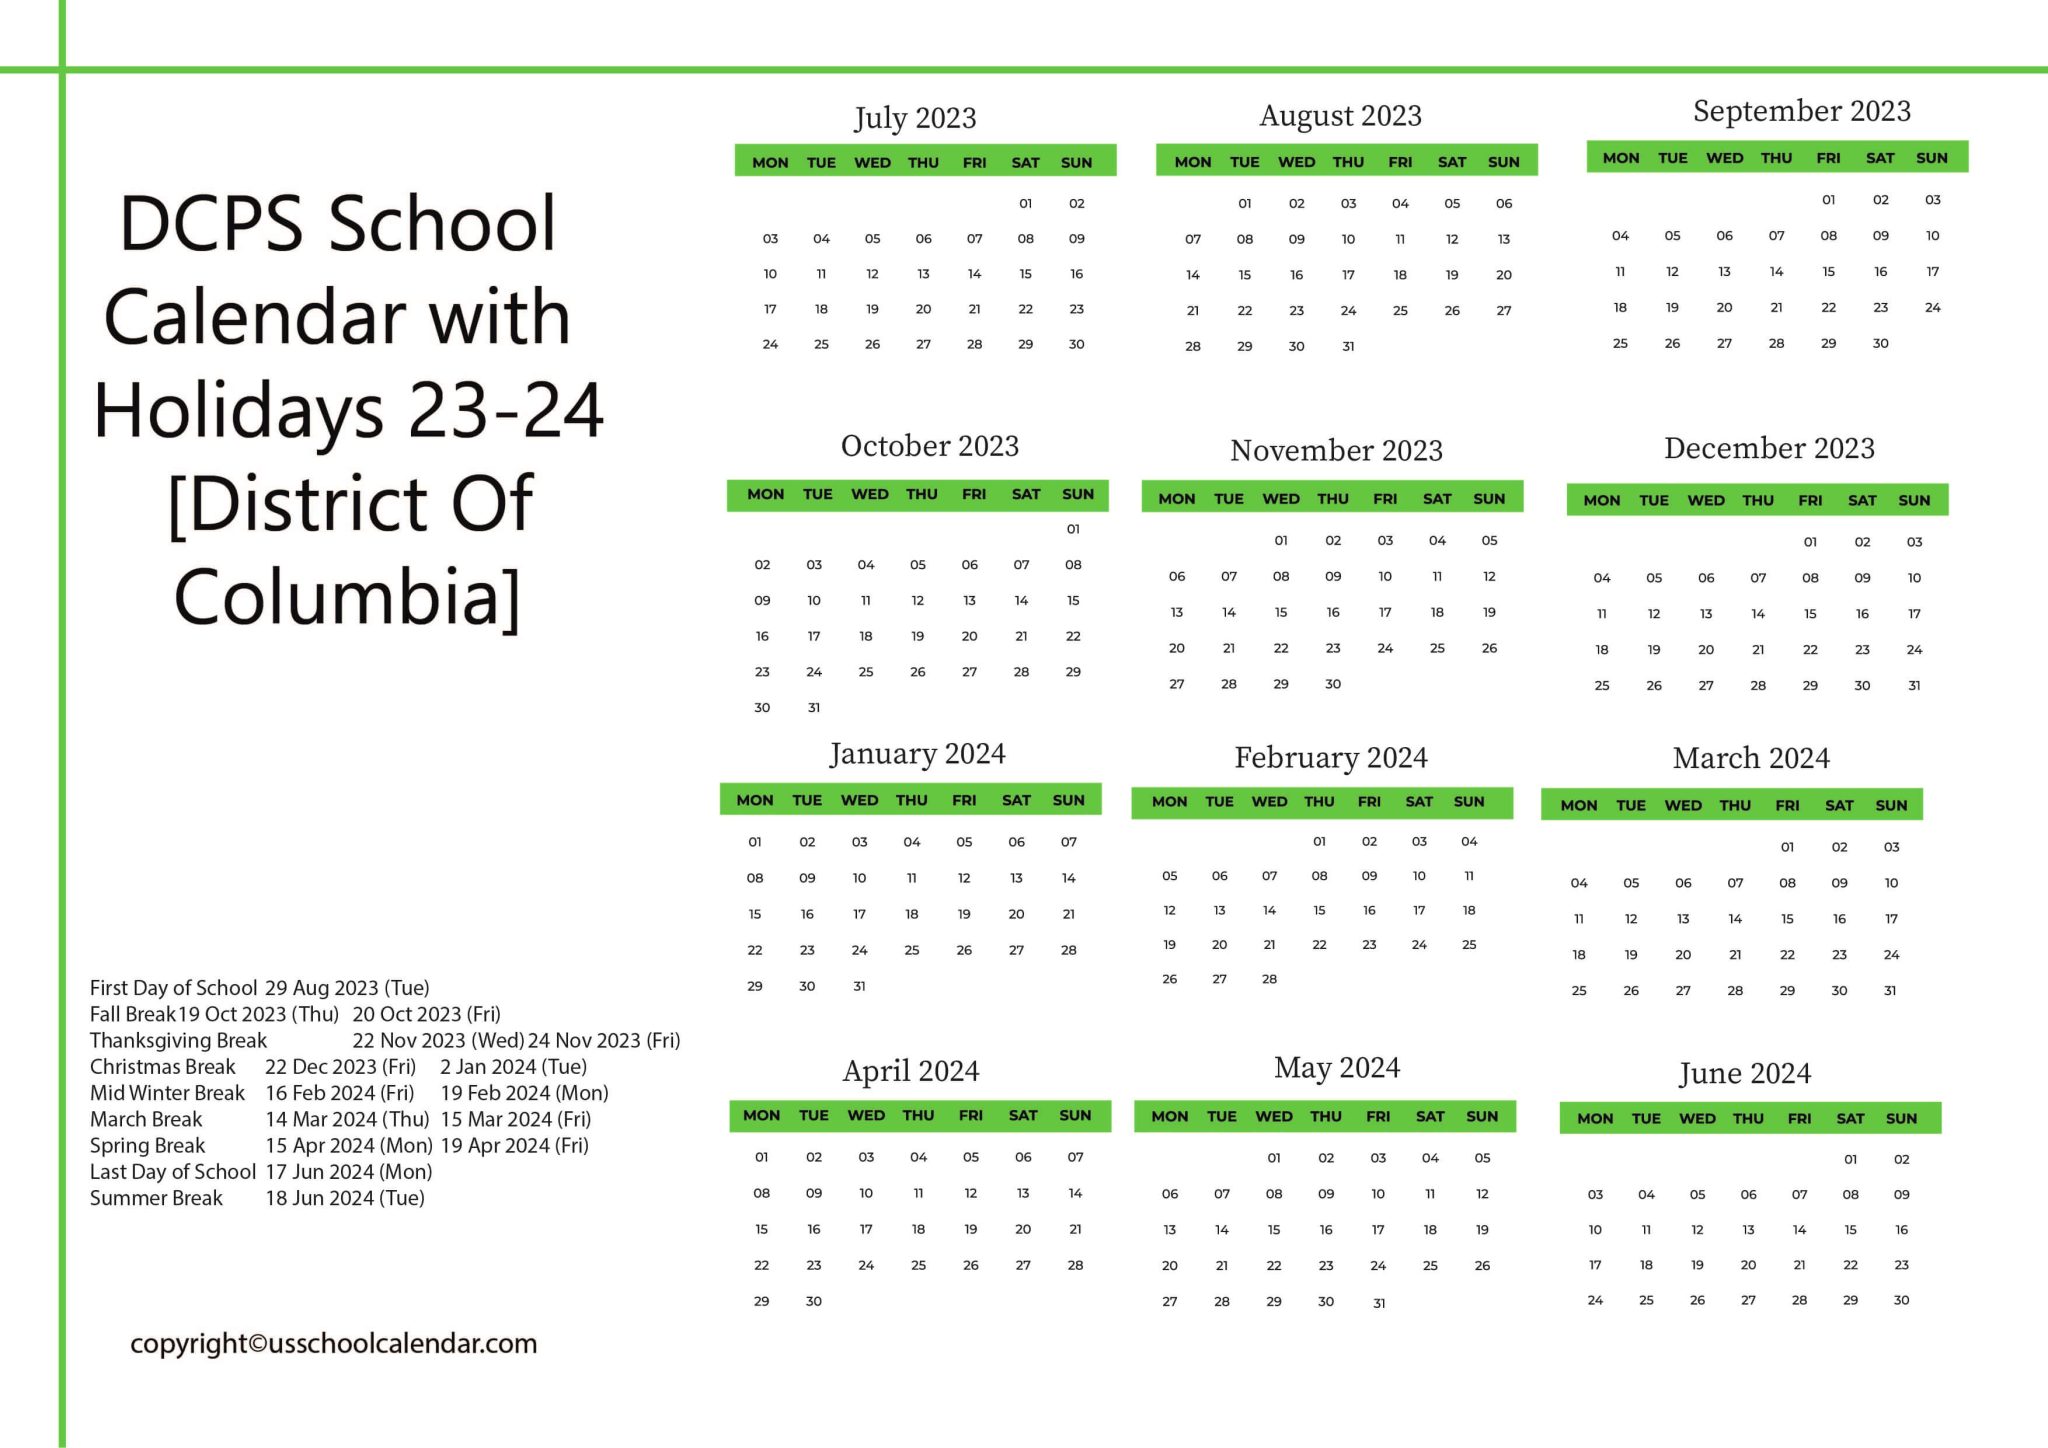 DCPS School Calendar with Holidays 2324 [District Of Columbia]